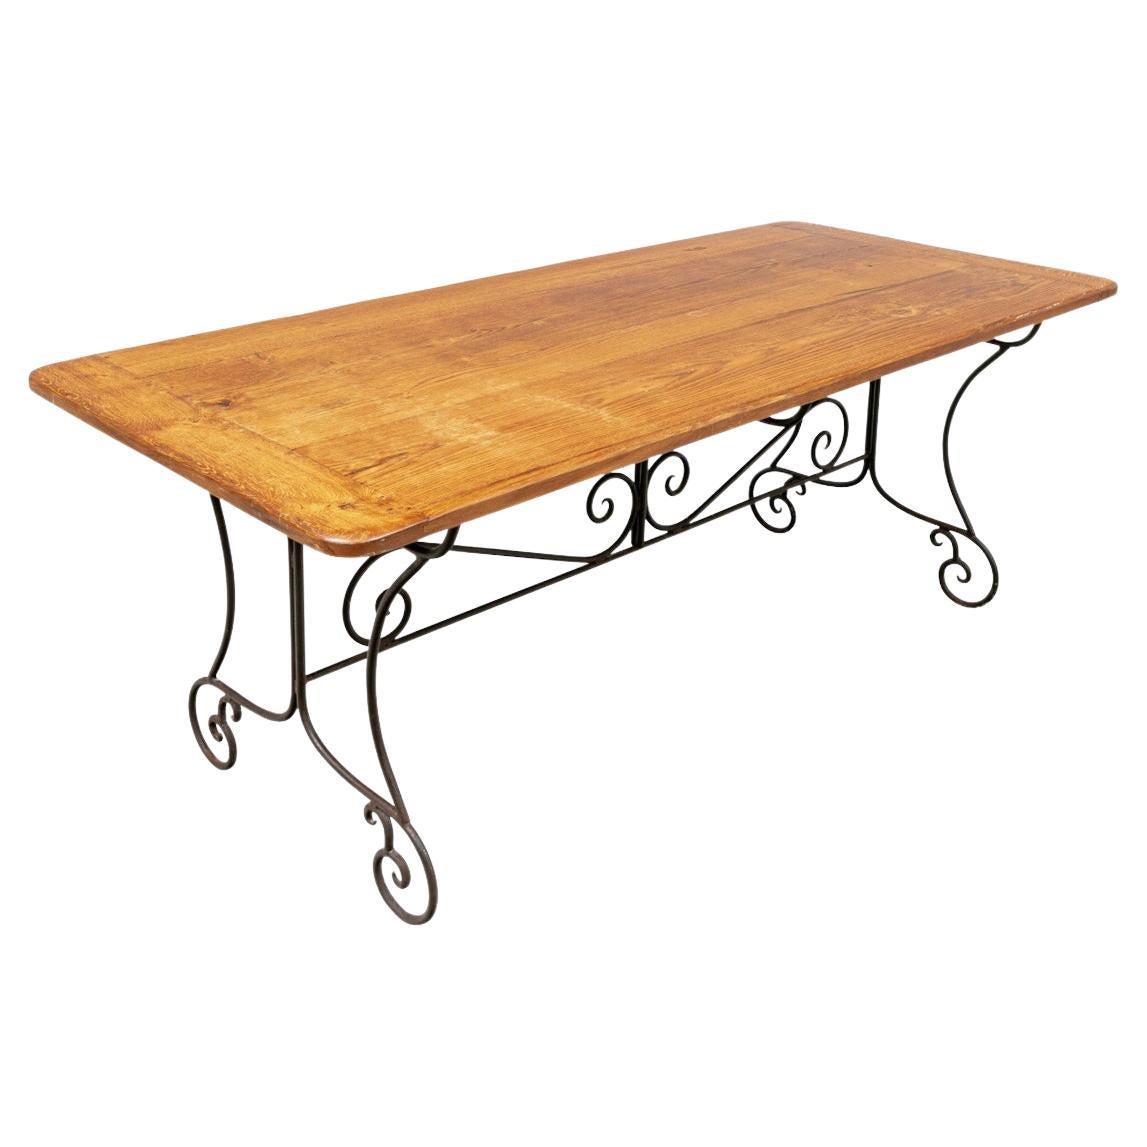 French Industrial Style Dining/ Work Table with Breadboard Top